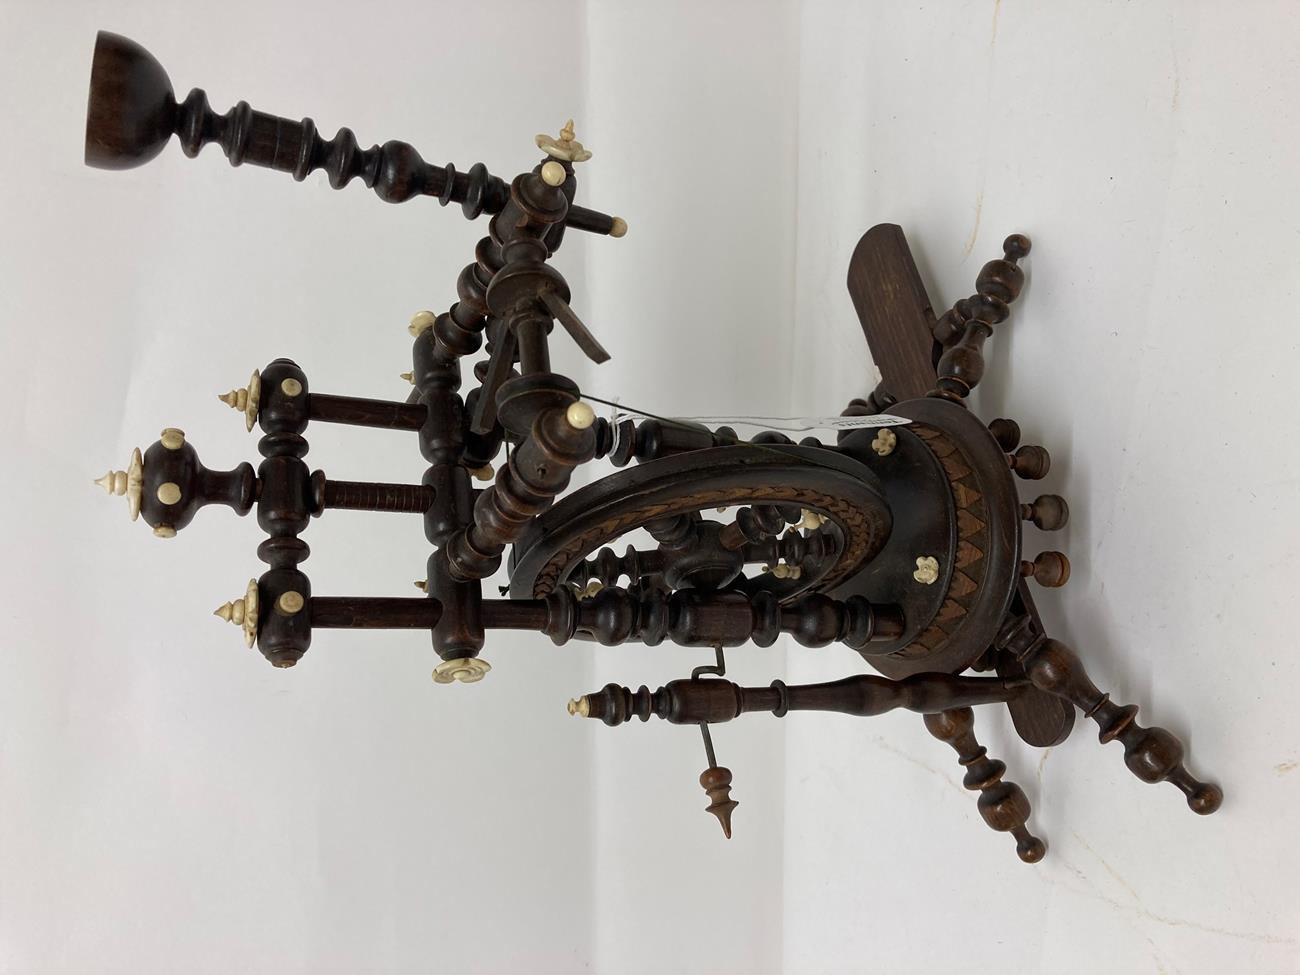 Circa 1900 Black Forest Treen Miniature Spinning Wheel, with baluster turned uprights and carved - Image 2 of 2